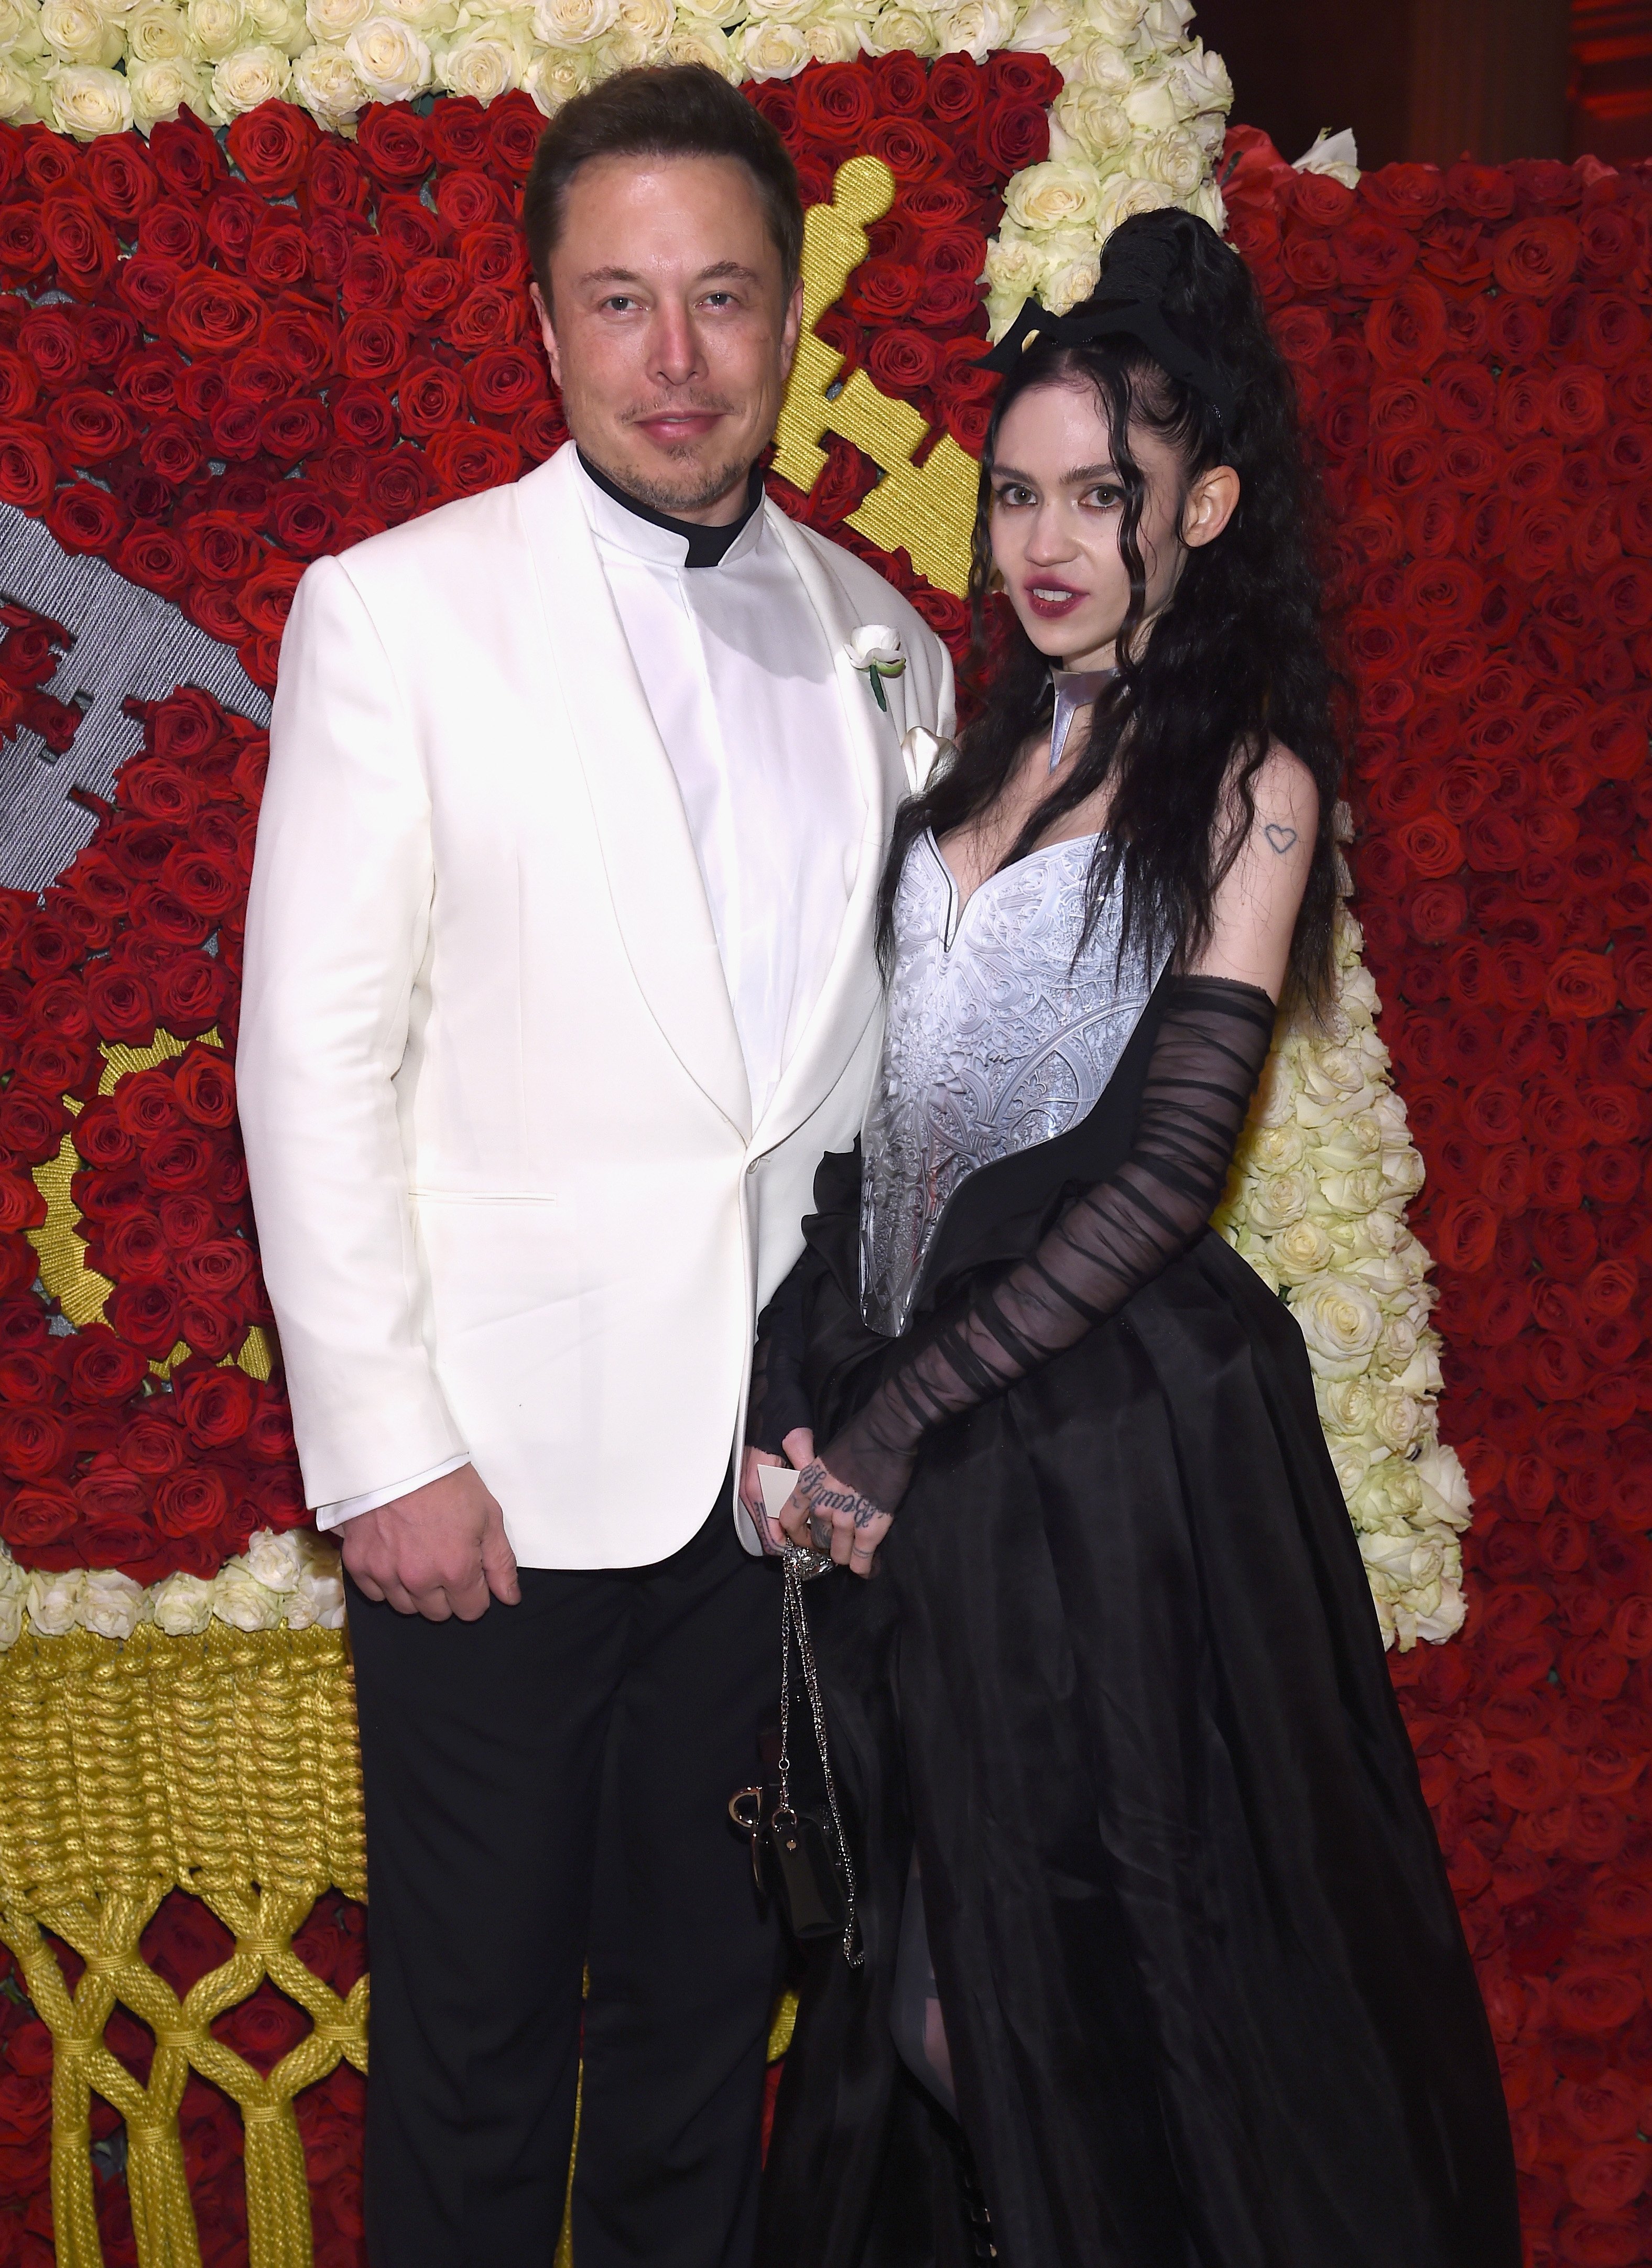 Elon Musk and Grimes attend the Heavenly Bodies: Fashion & The Catholic Imagination Costume Institute Gala at The Metropolitan Museum of Art on May 7, 2018 in New York City. | Source: Getty Images